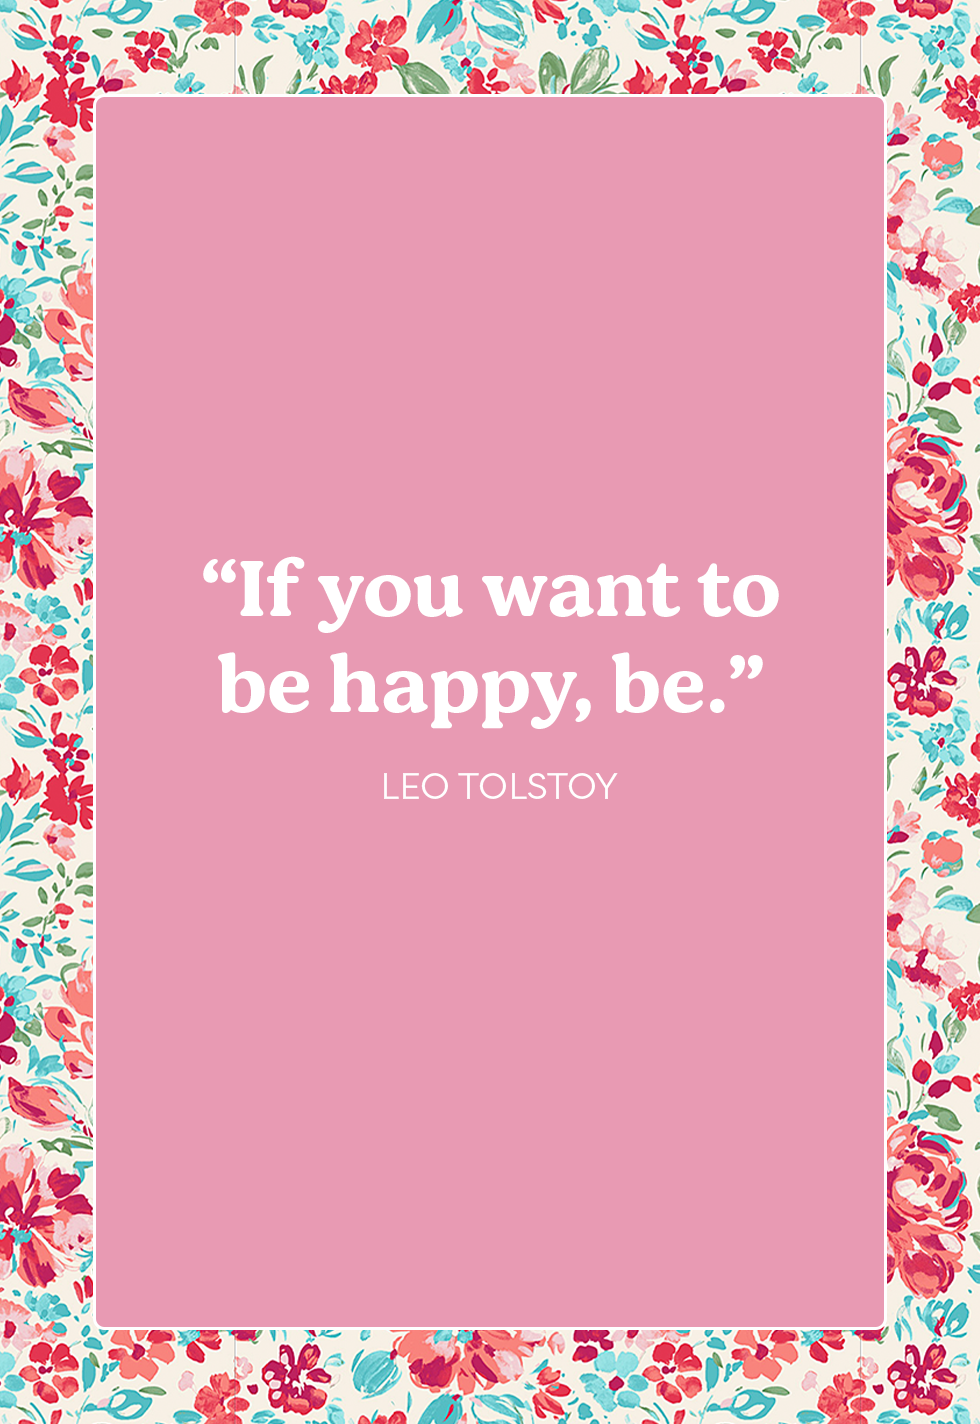 50 Best Happy Quotes - Inspiring Quotes About Happiness